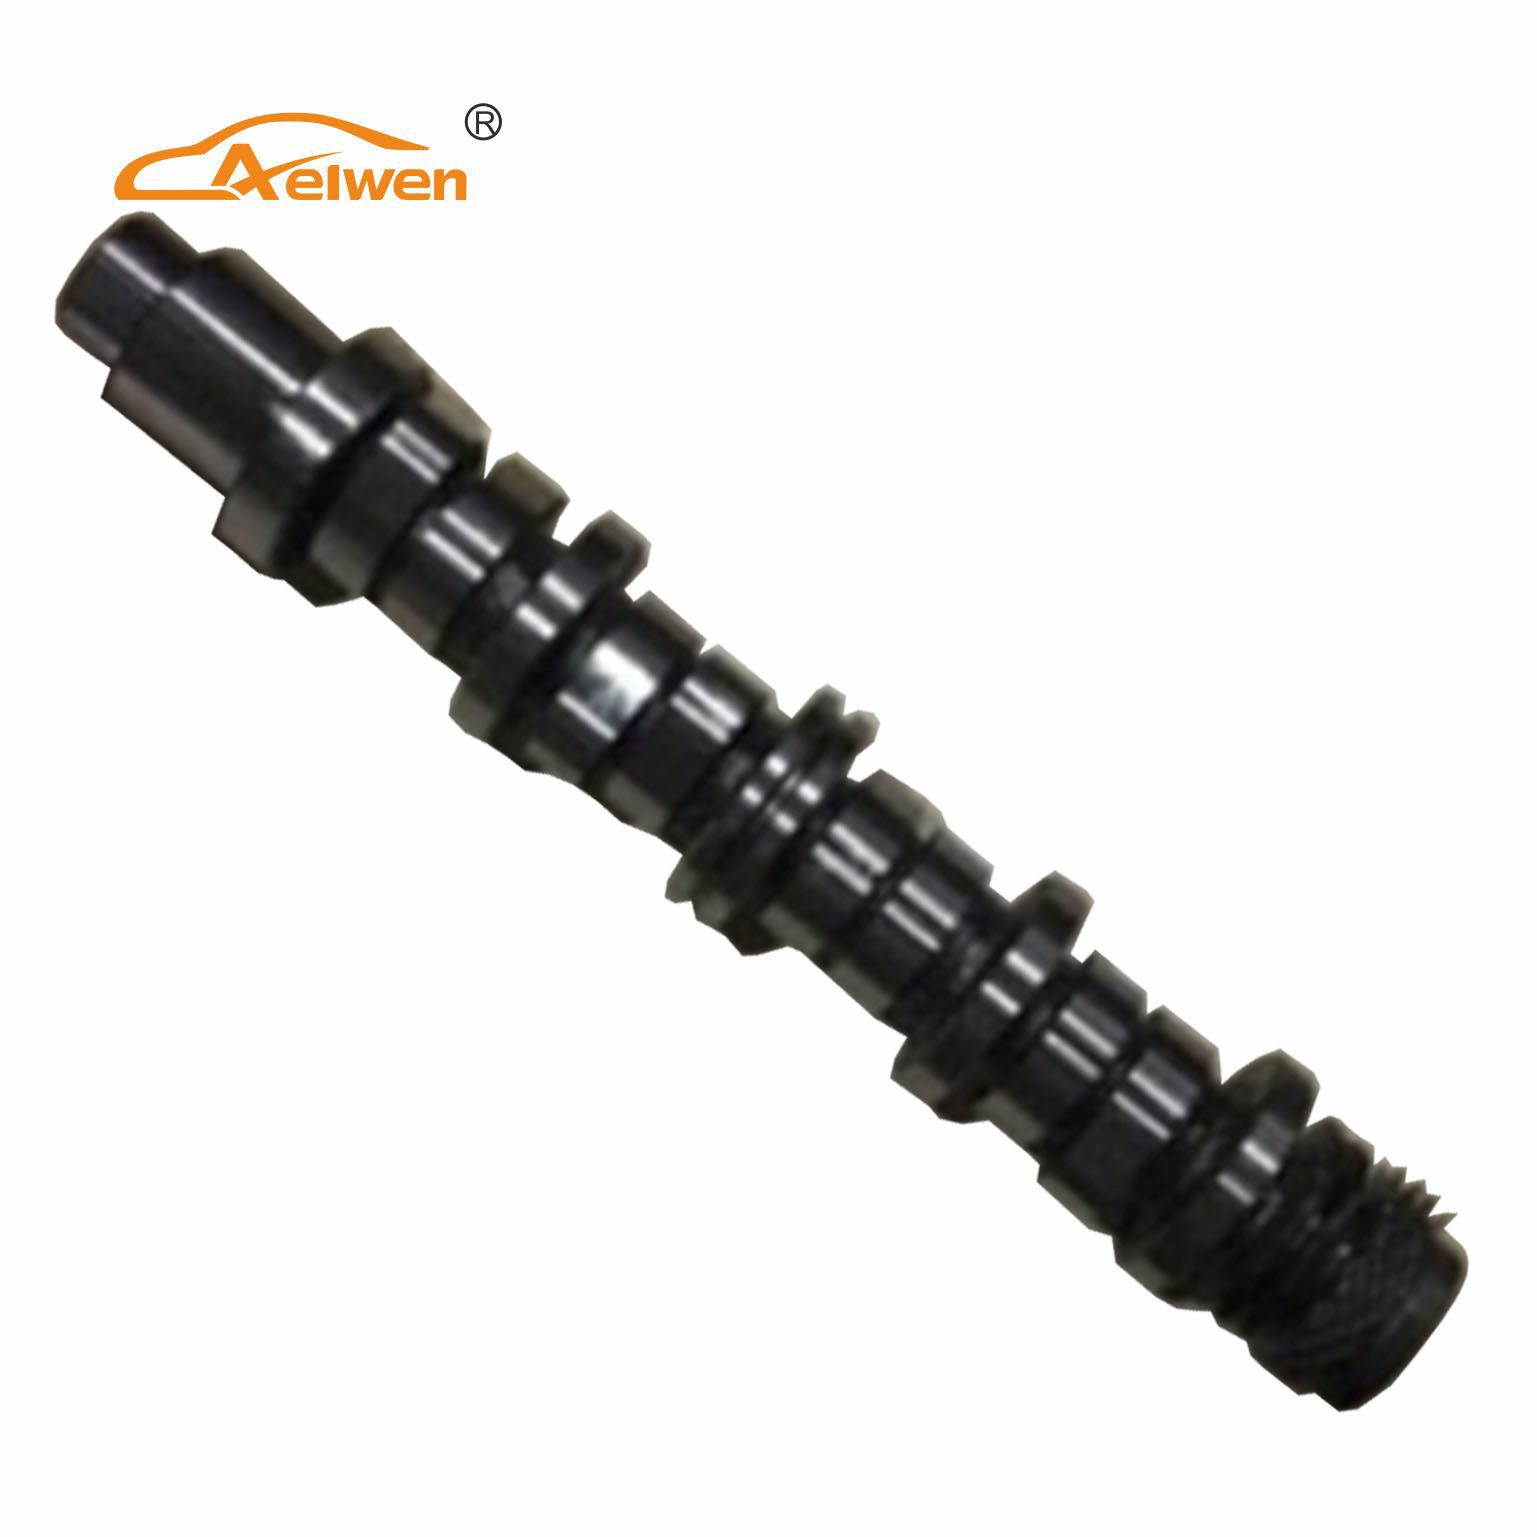 465 Aelwen High Quality Right-Handed Auto Camshaft for Japanese Cars